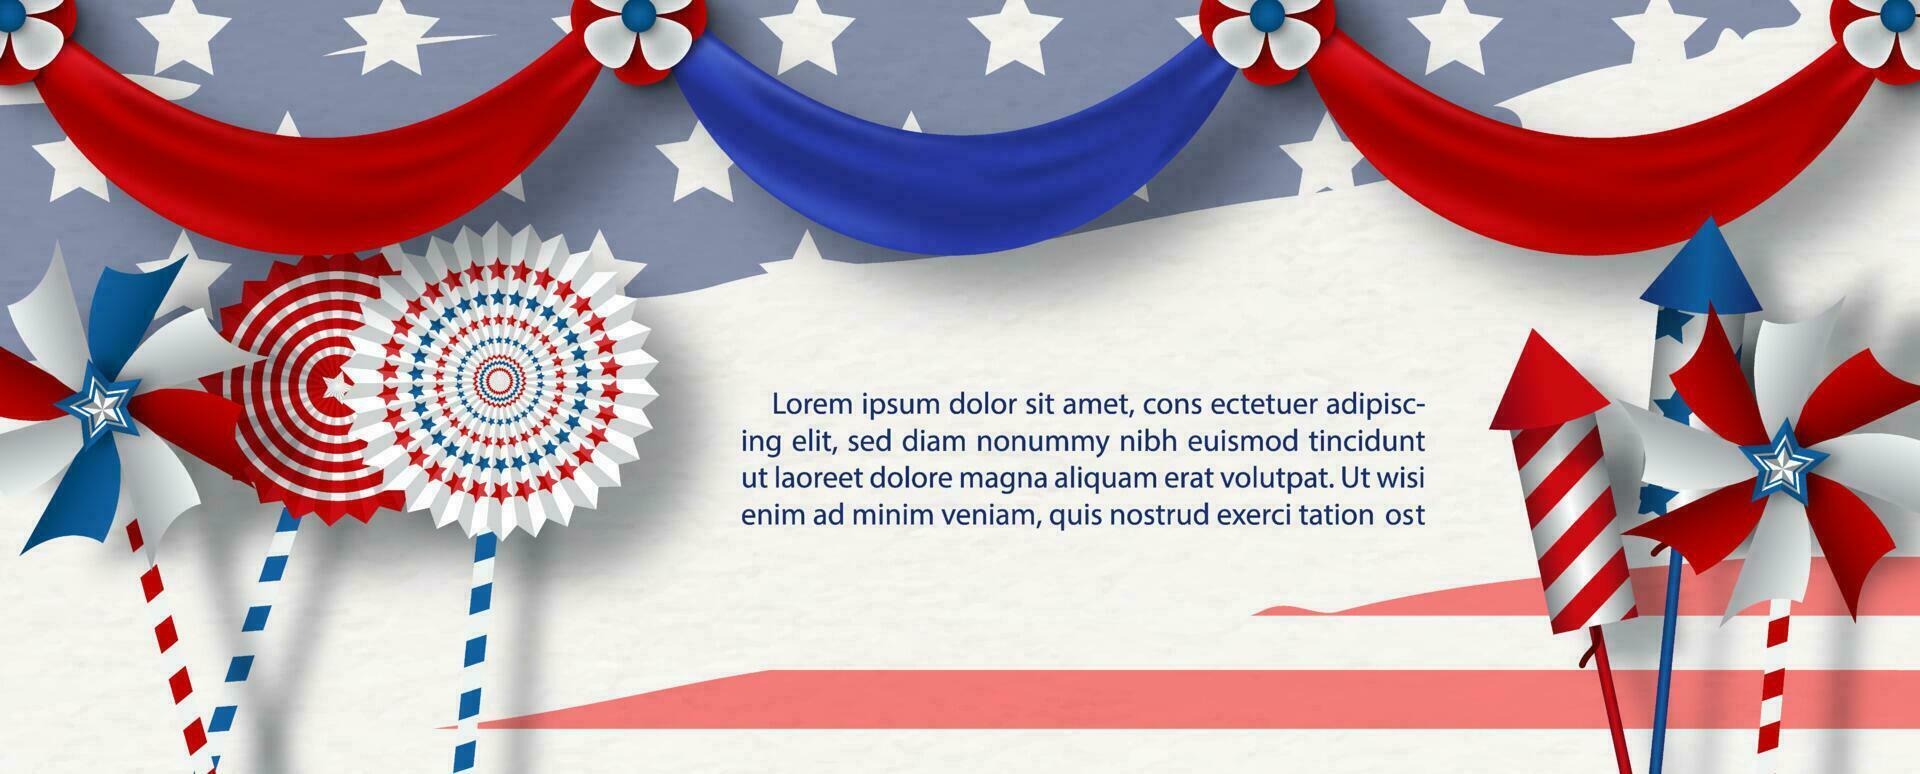 Toy and objects with decorated fabric, example texts on the U.S.A flag and white background.  poster of the U.S.A independent day in papercut style and vector design.